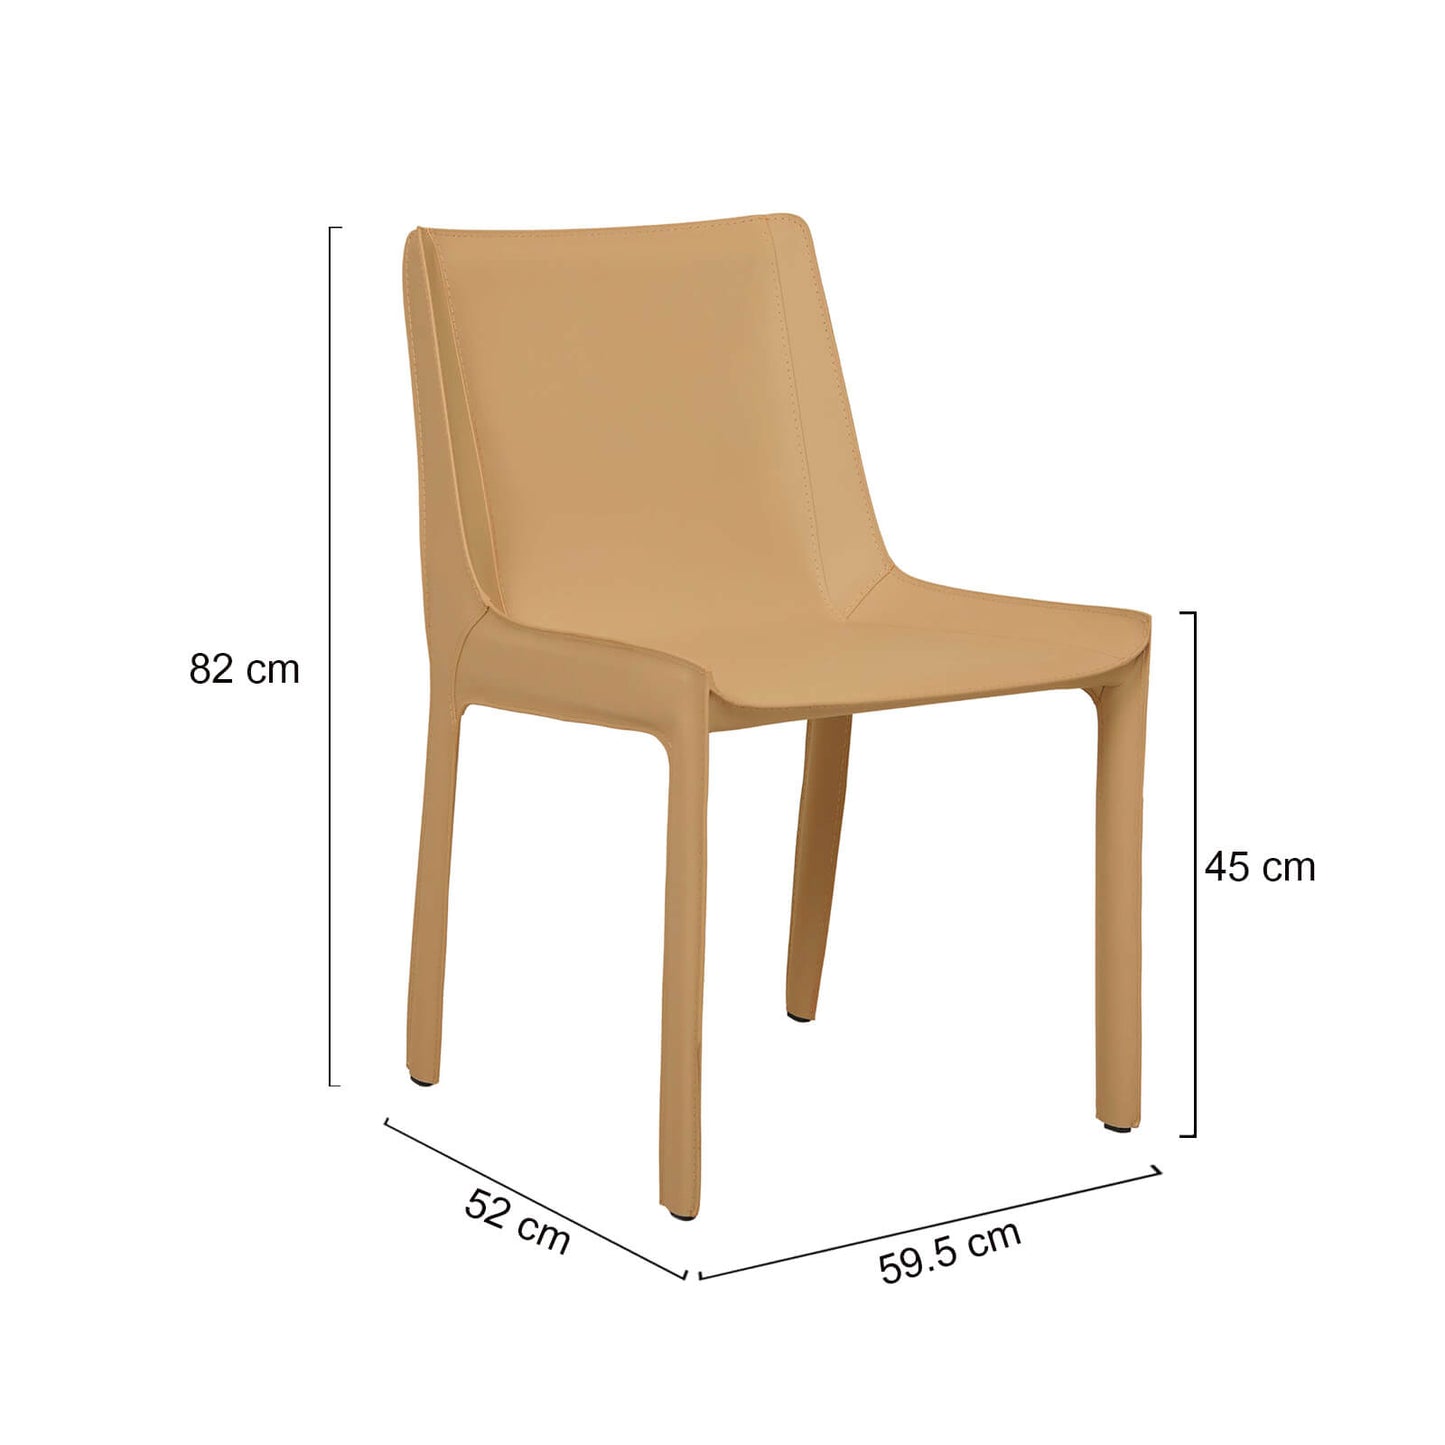 Scout | Contemporary Coastal Tan Leather Dining Chair | Tan